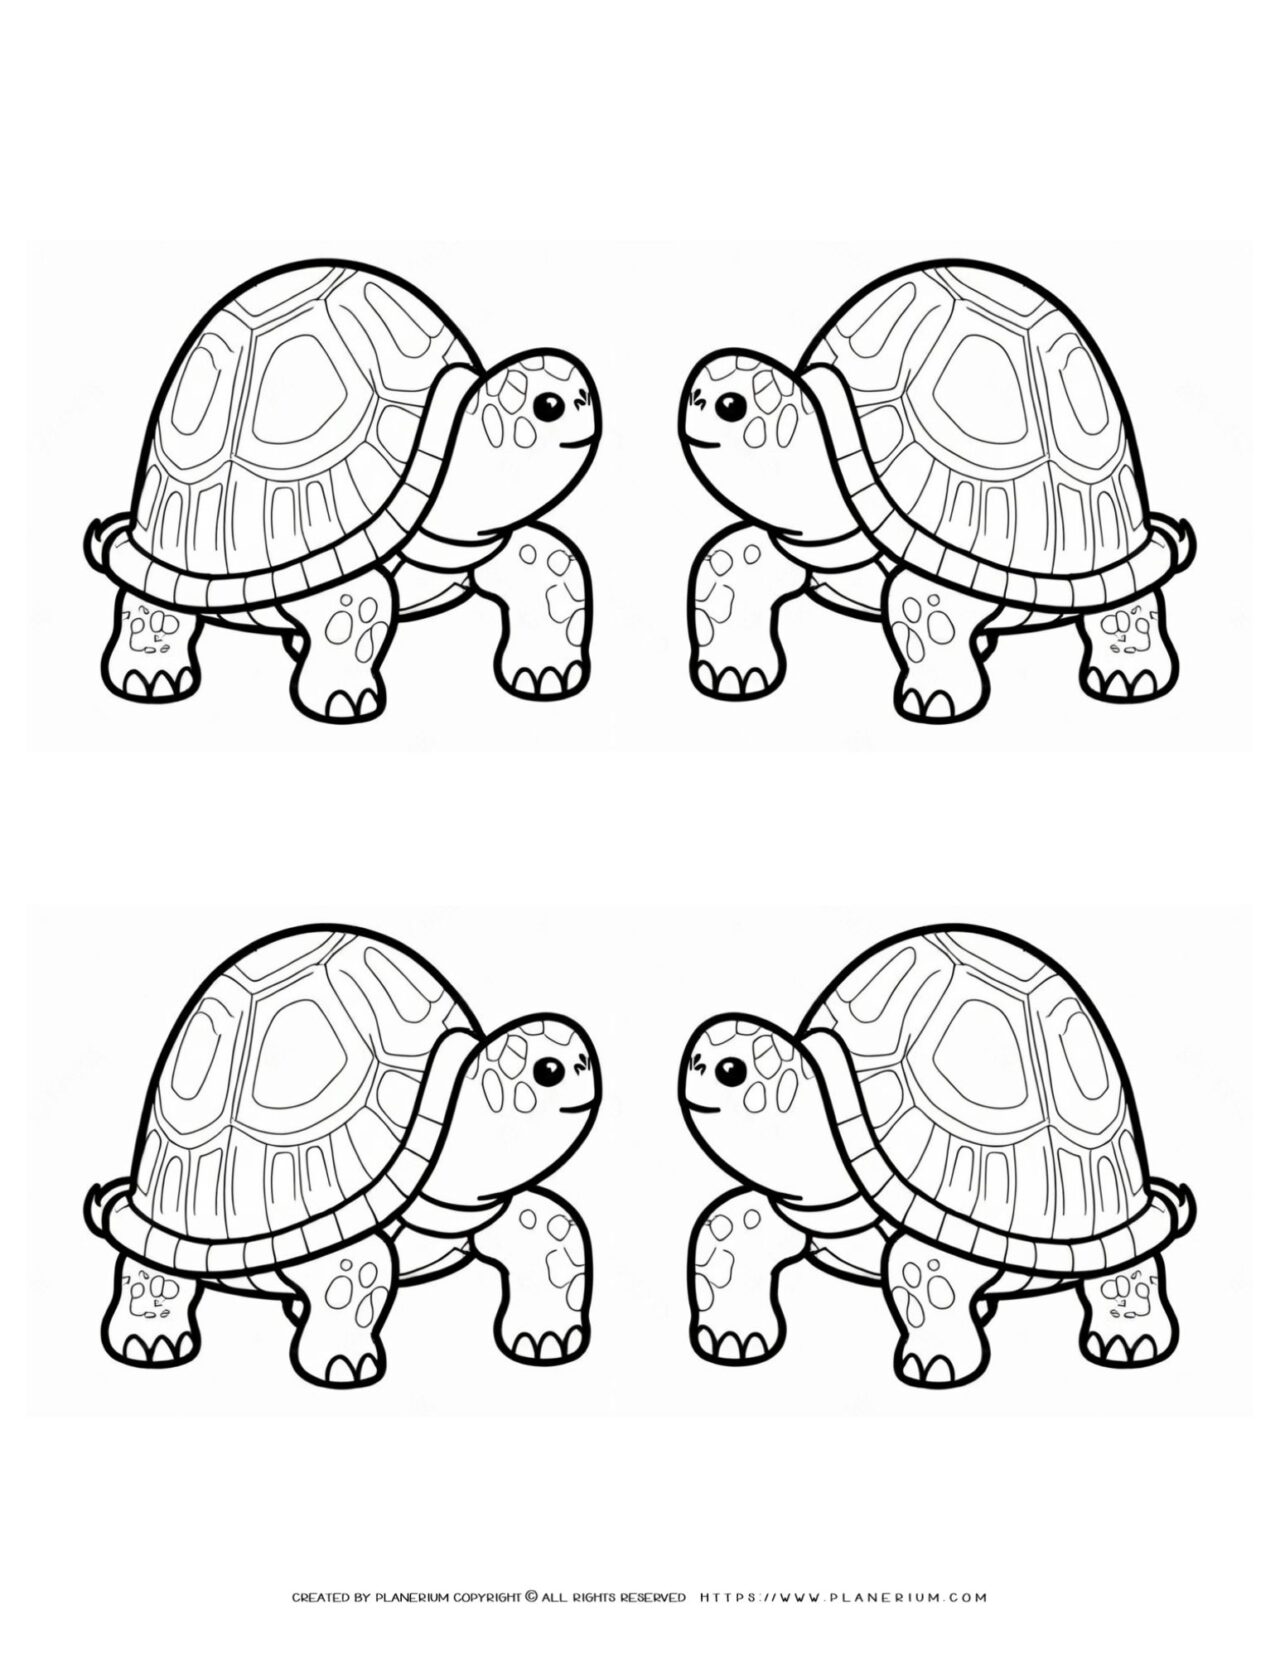 Four-Detailed-Turtles-Looking-at-Each-Other-Cartoon-Style-Coloring-Page-for-Kids